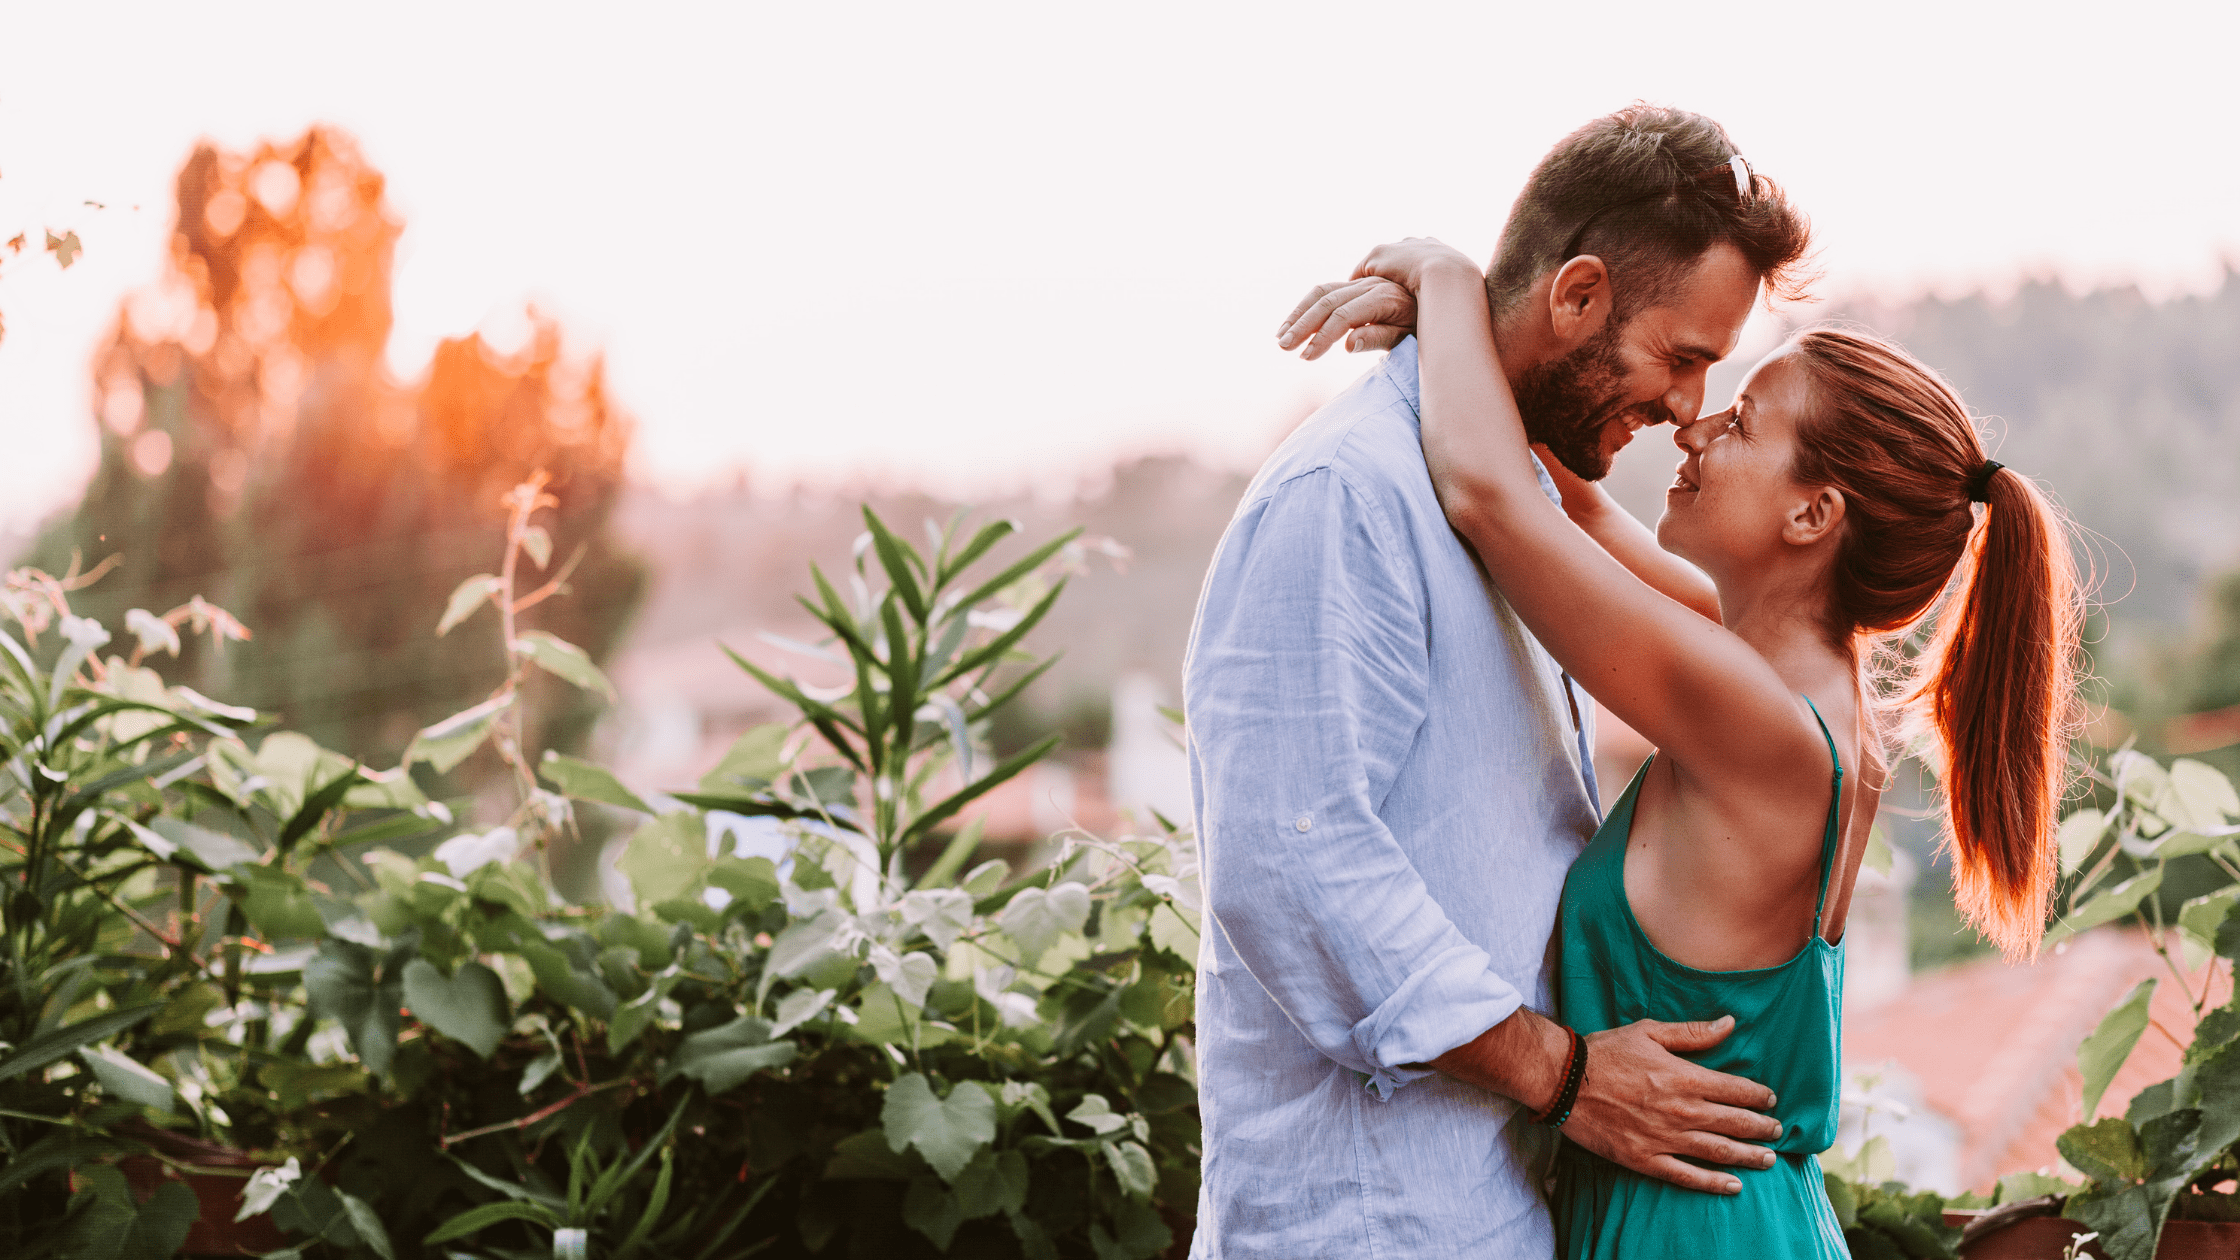 15 Signs your partner is losing interest in you 46